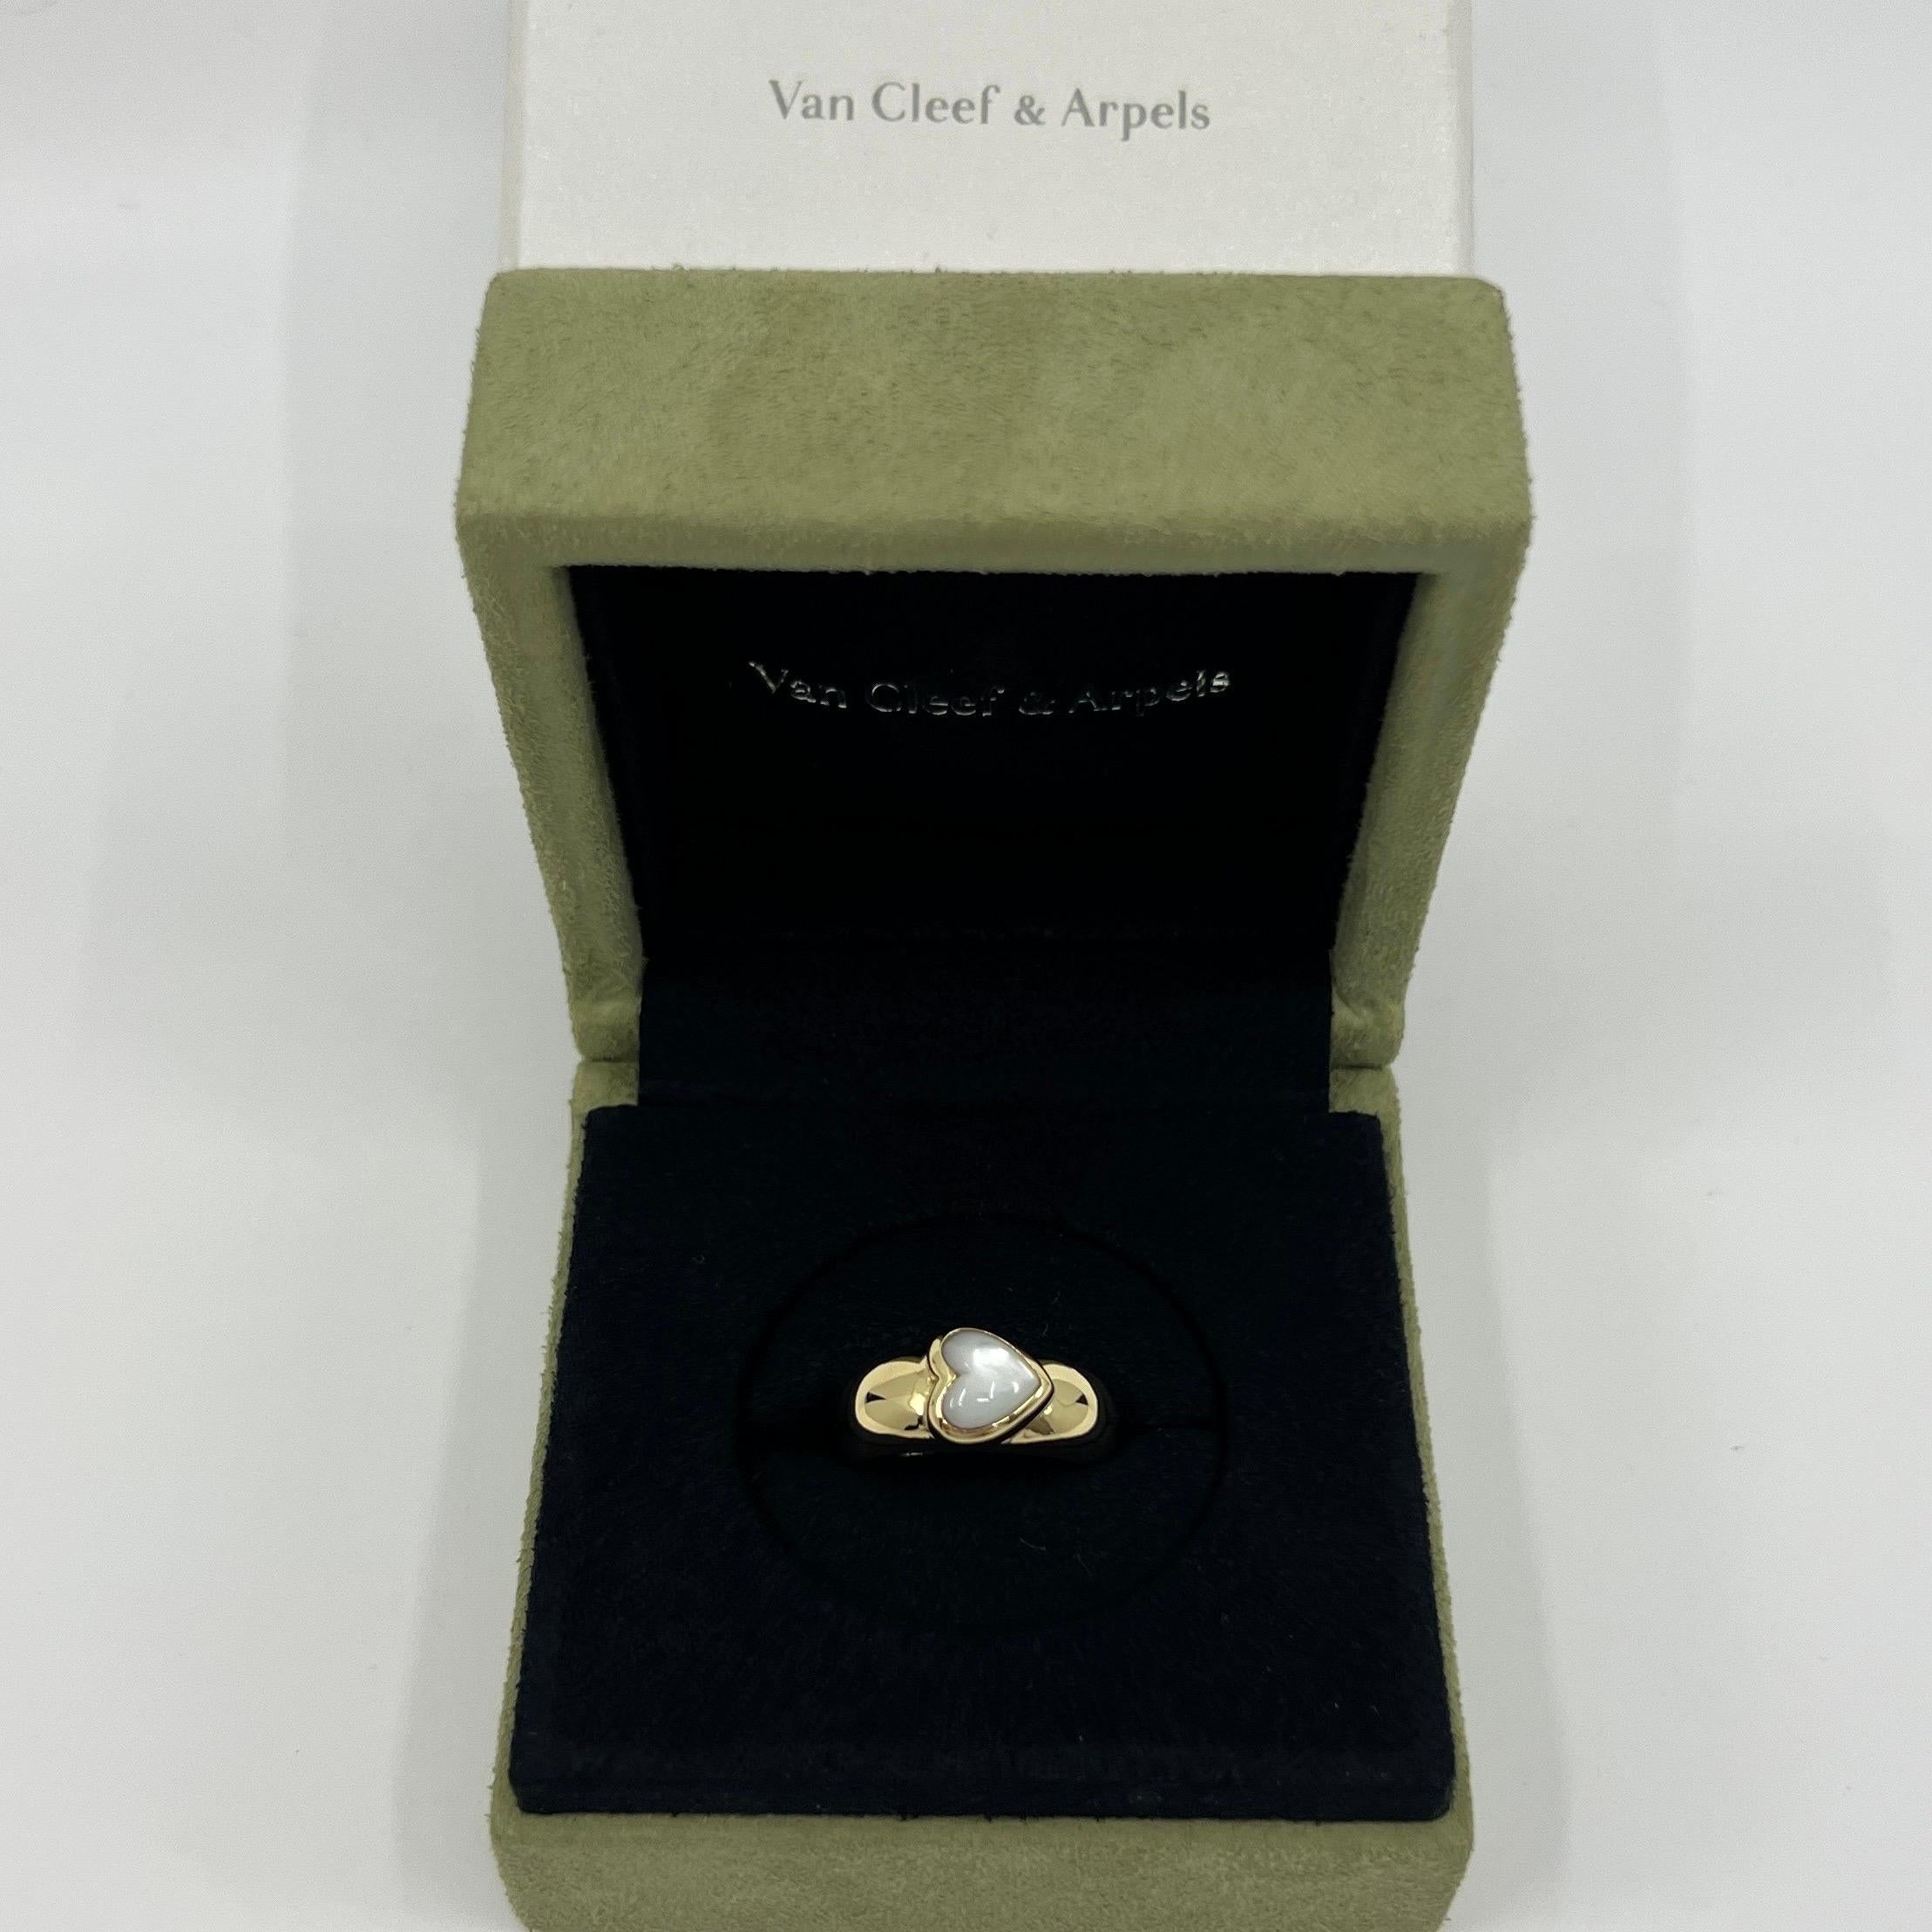 Rare Vintage Van Cleef & Arpels Heart Cut Mother Of Pearl 18k Yellow Gold Dome Ring.

A stunning vintage Van Cleef & Arpels ring with a beautiful top grade mother of pearl displaying beautiful lustre and an excellent heart cabochon cut.
A fine